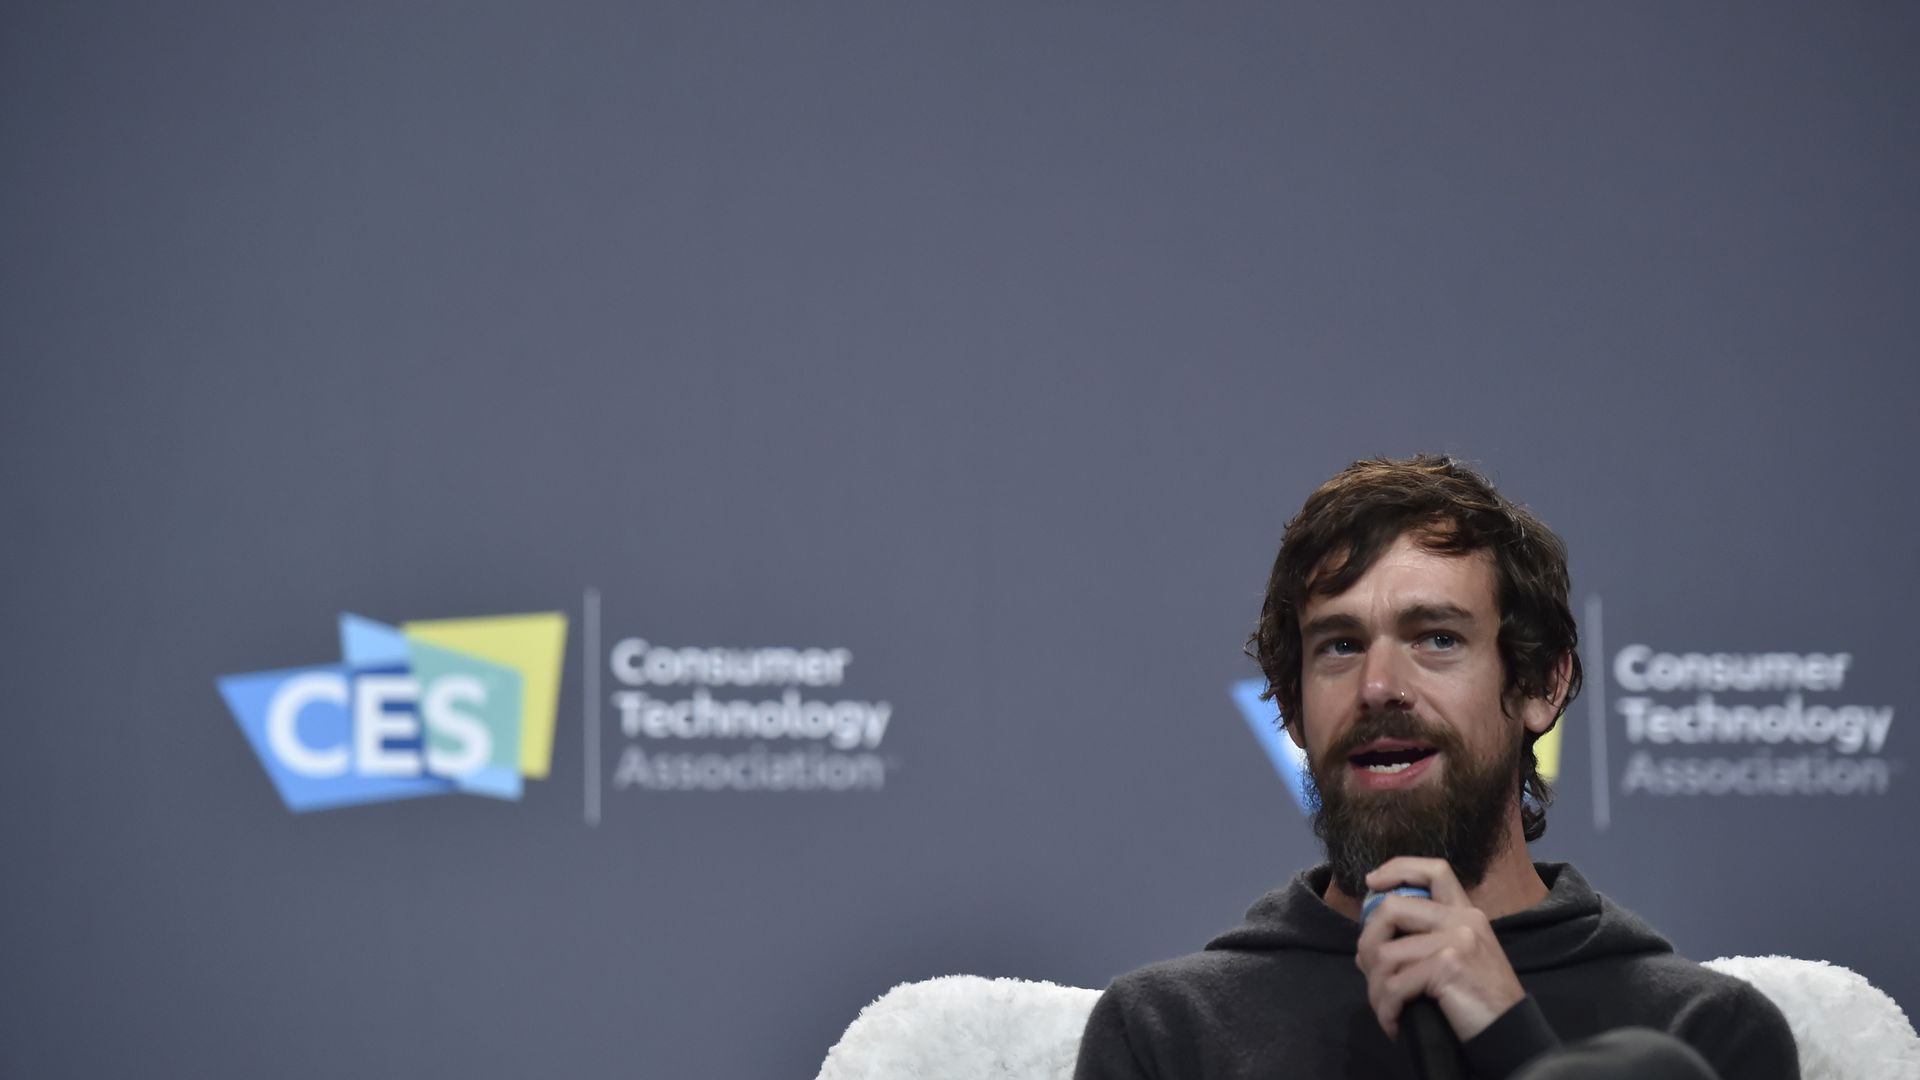 In this image, Twitter CEO Jack Dorsey sits in front of a dark gray wall at a conference, speaking into a microphone. 